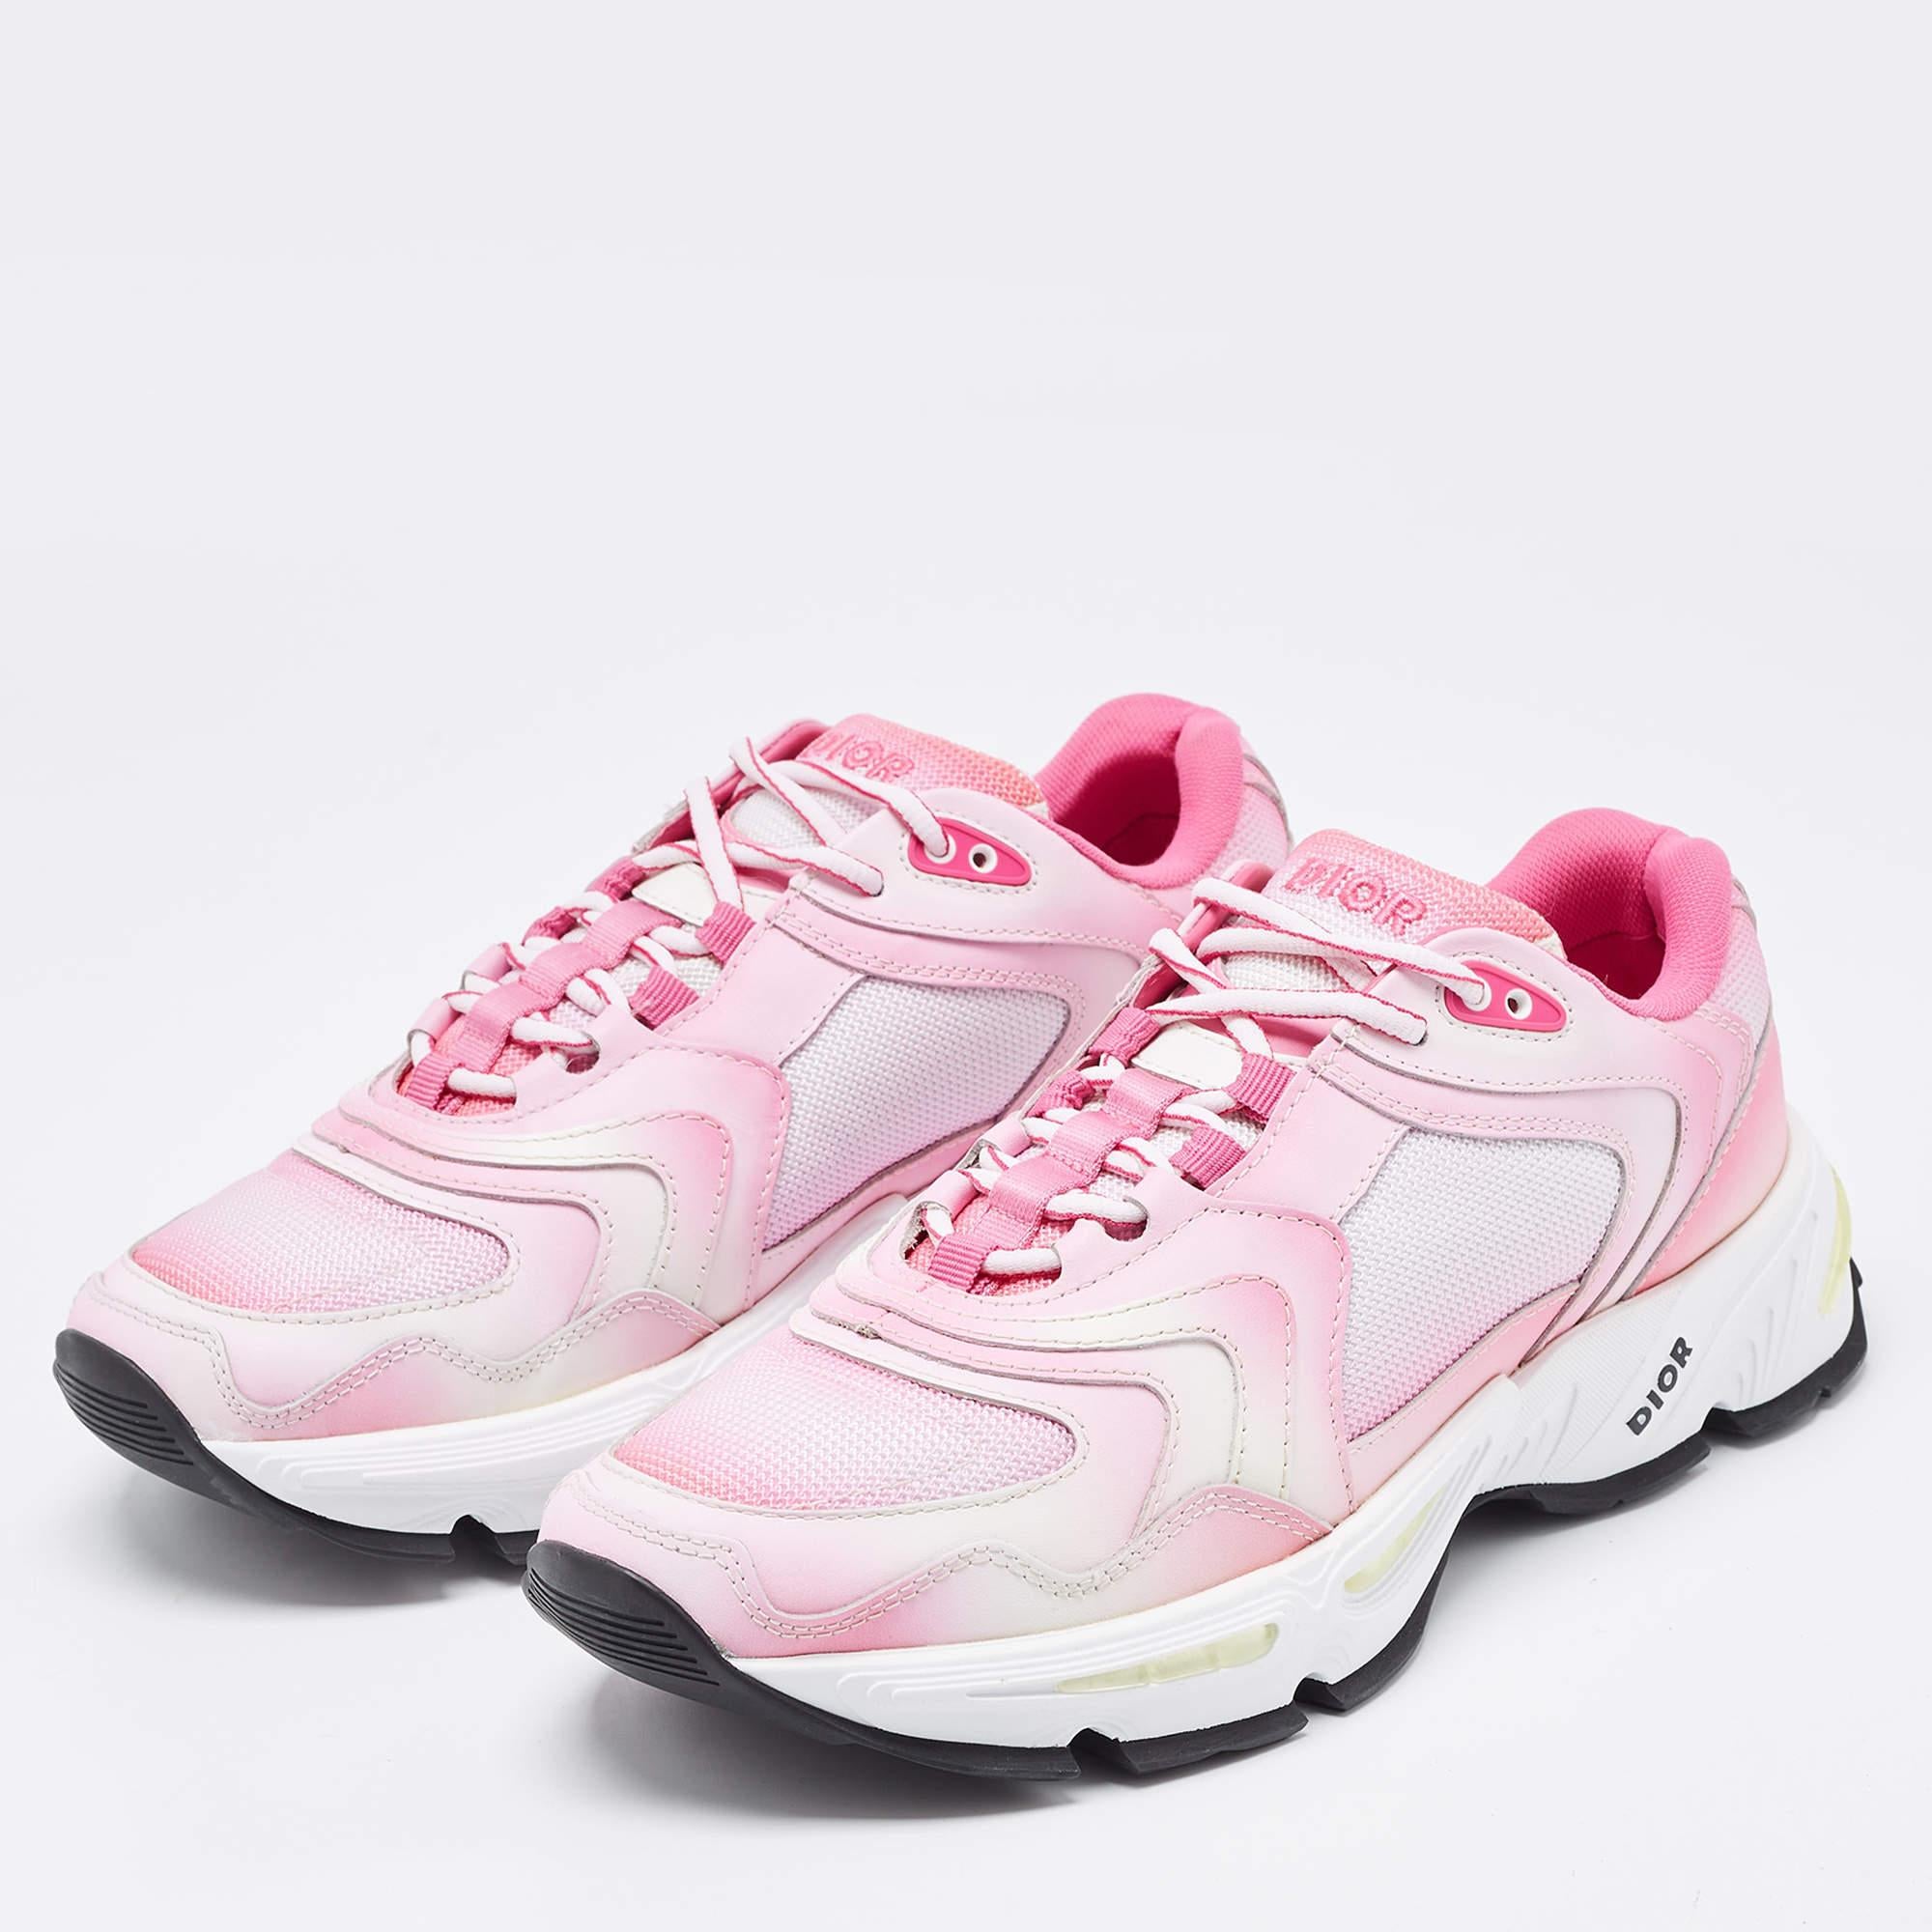 Upgrade your style with these Dior pink/white sneakers. Meticulously designed for fashion and comfort, they're the ideal choice for a trendy and comfortable stride.

